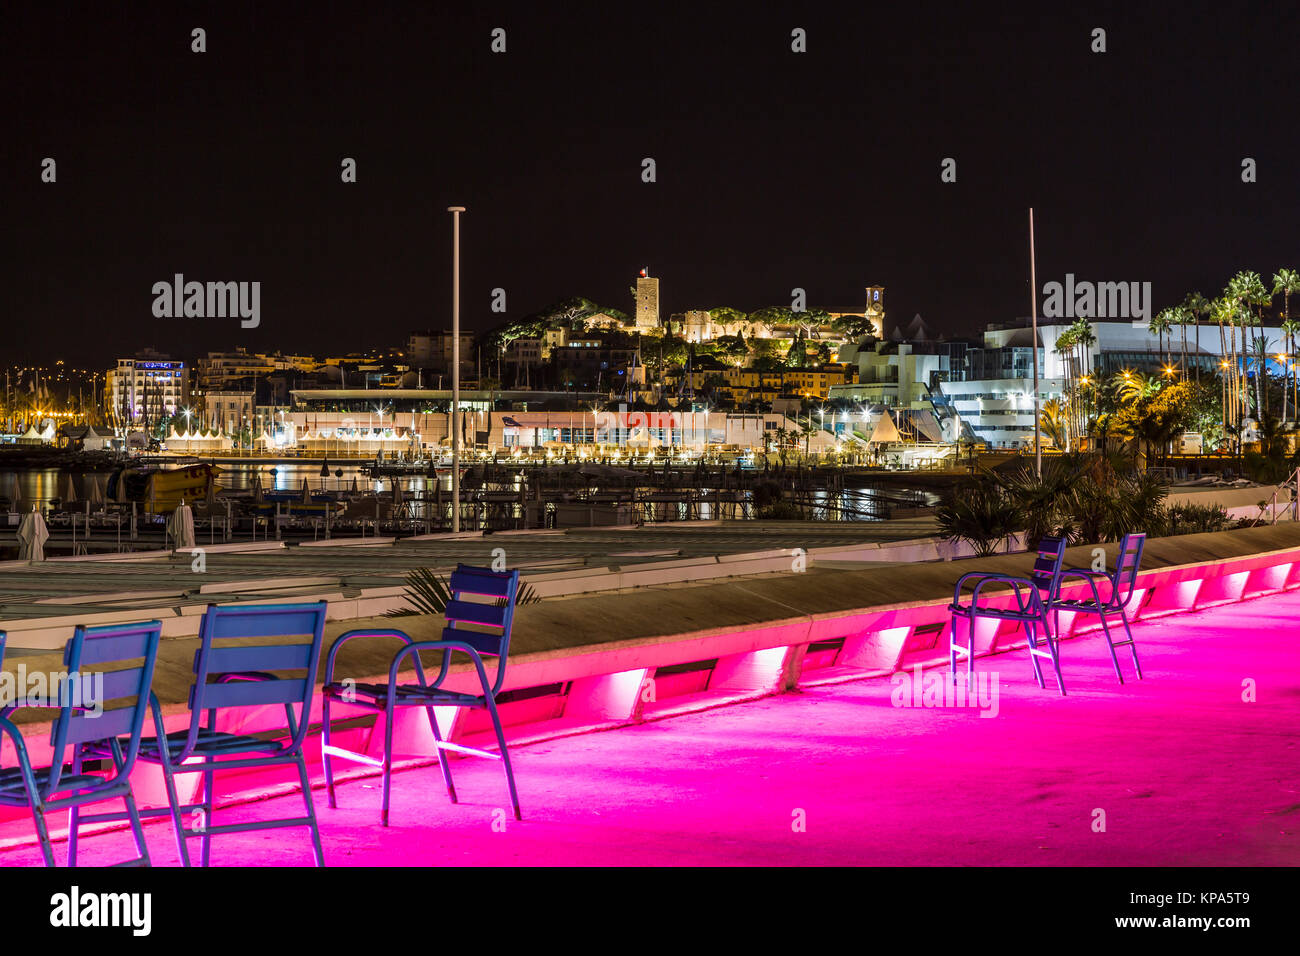 Image shows the cosmopolitan city of Cannes in the French Riviera, in the background illuminated city Stock Photo